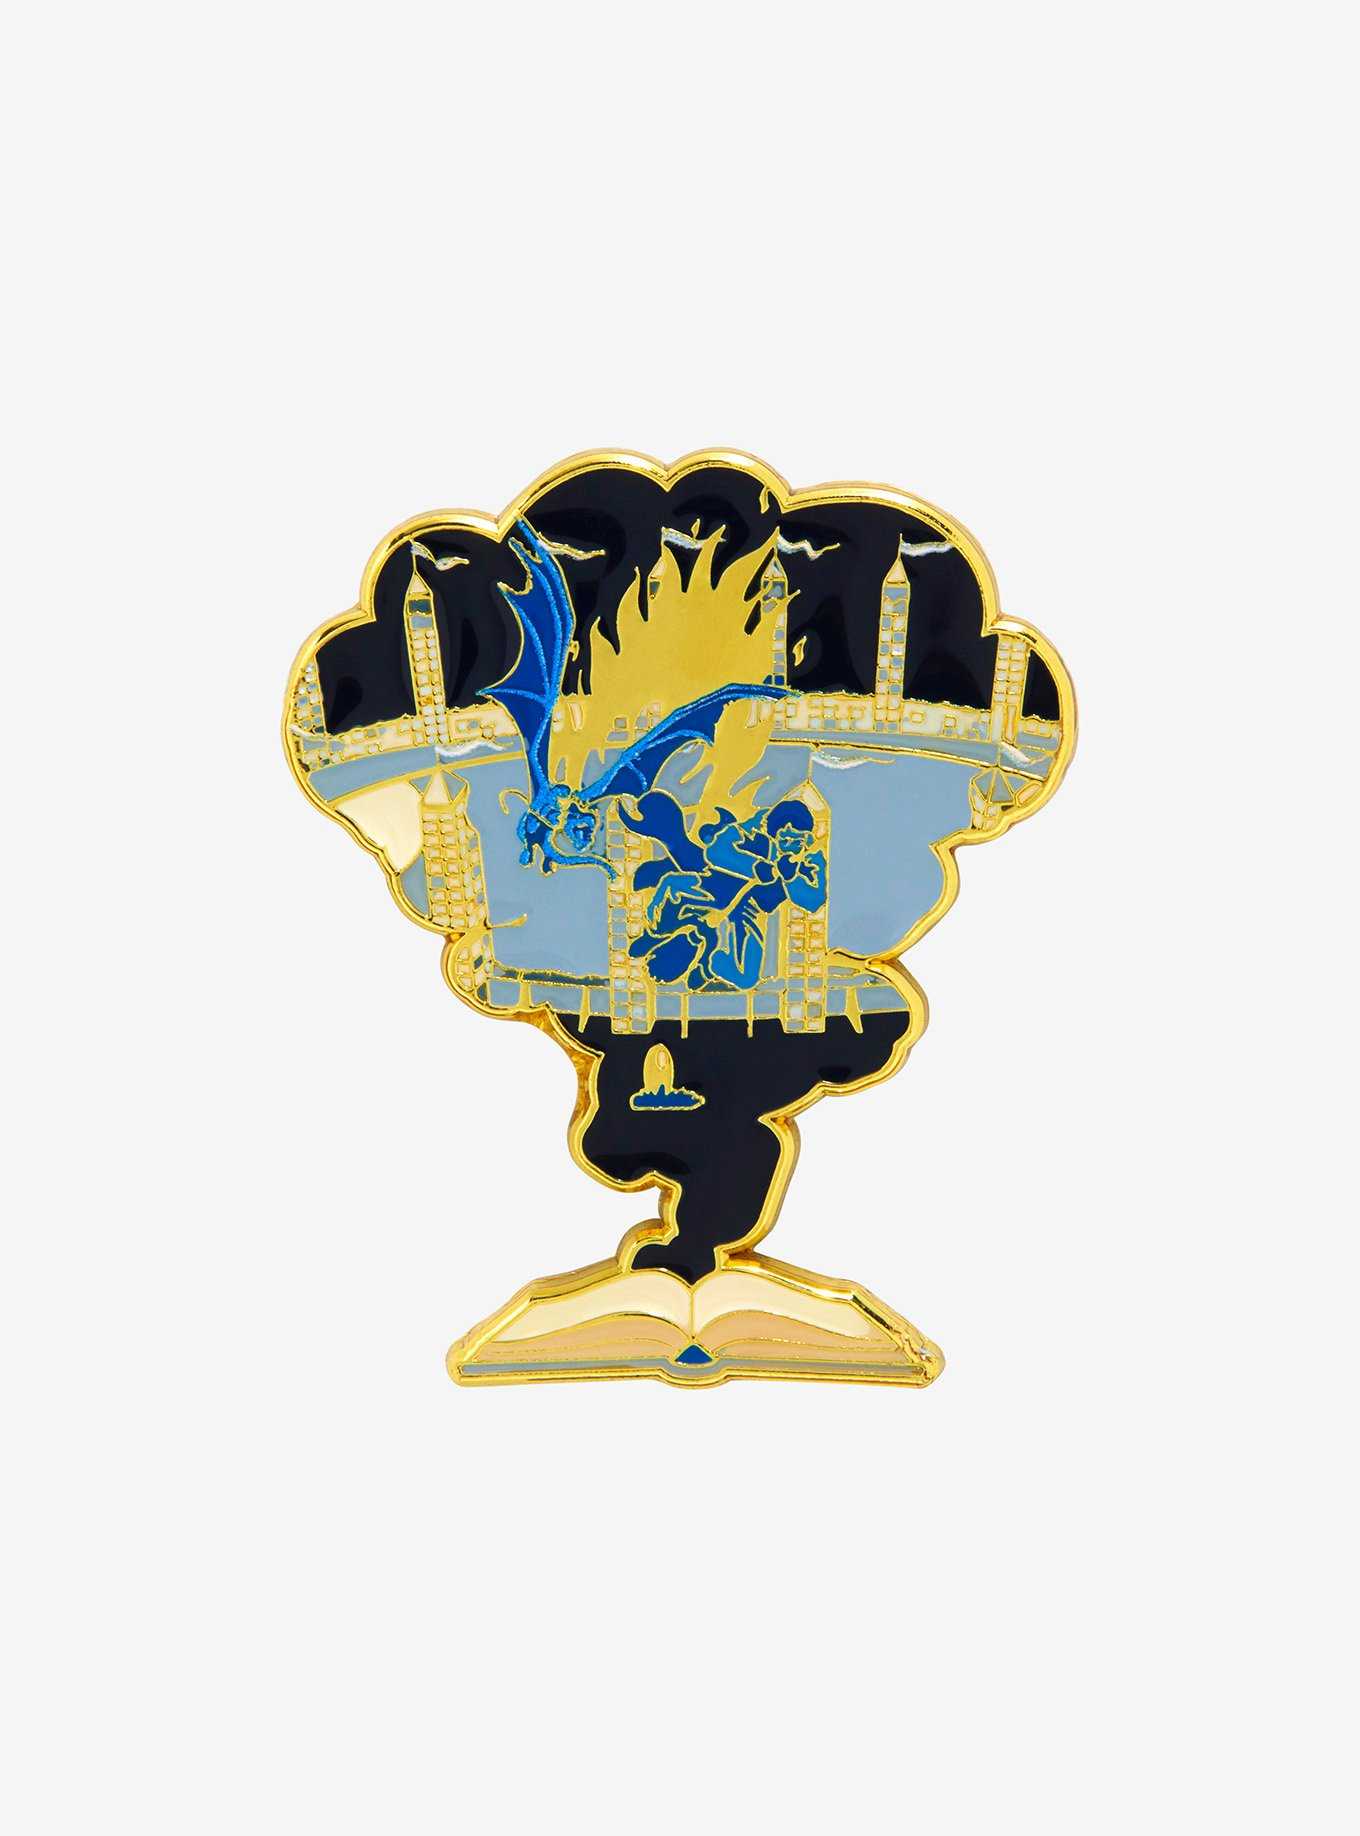 Loungefly Harry Potter Dragon Book Enamel Pin - BoxLunch Exclusive, , hi-res